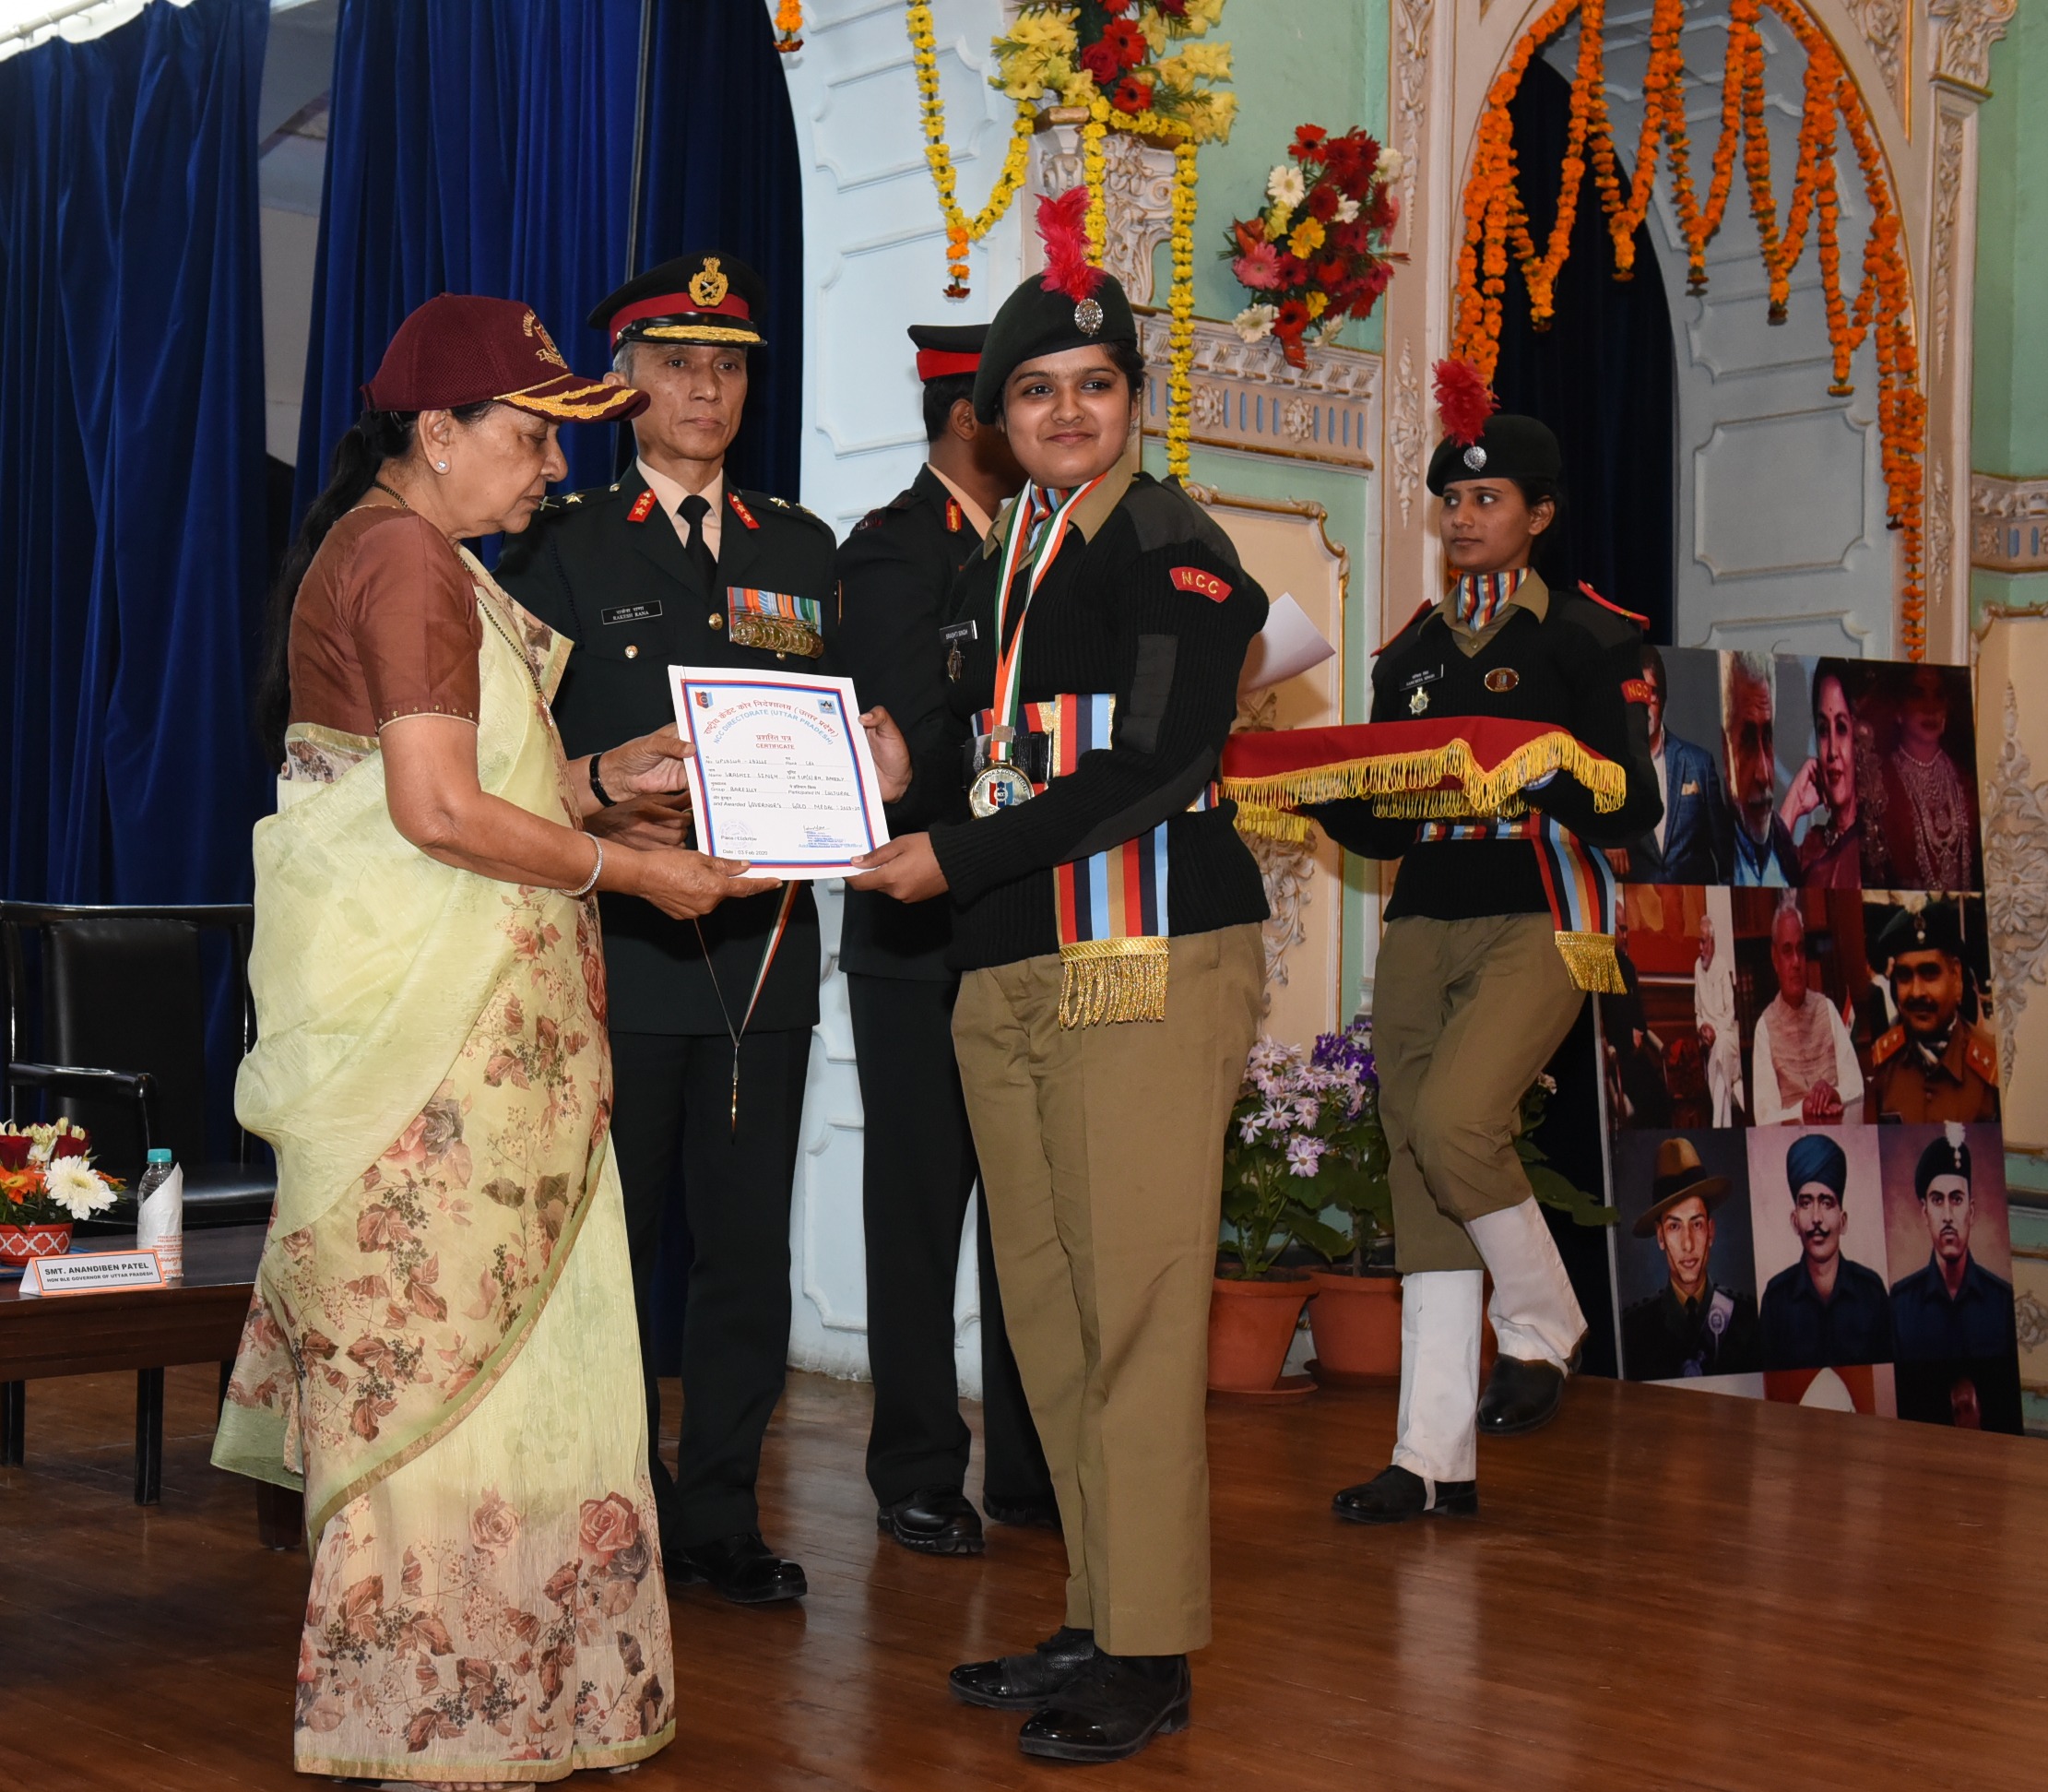 The Governor honored NCC Cadets